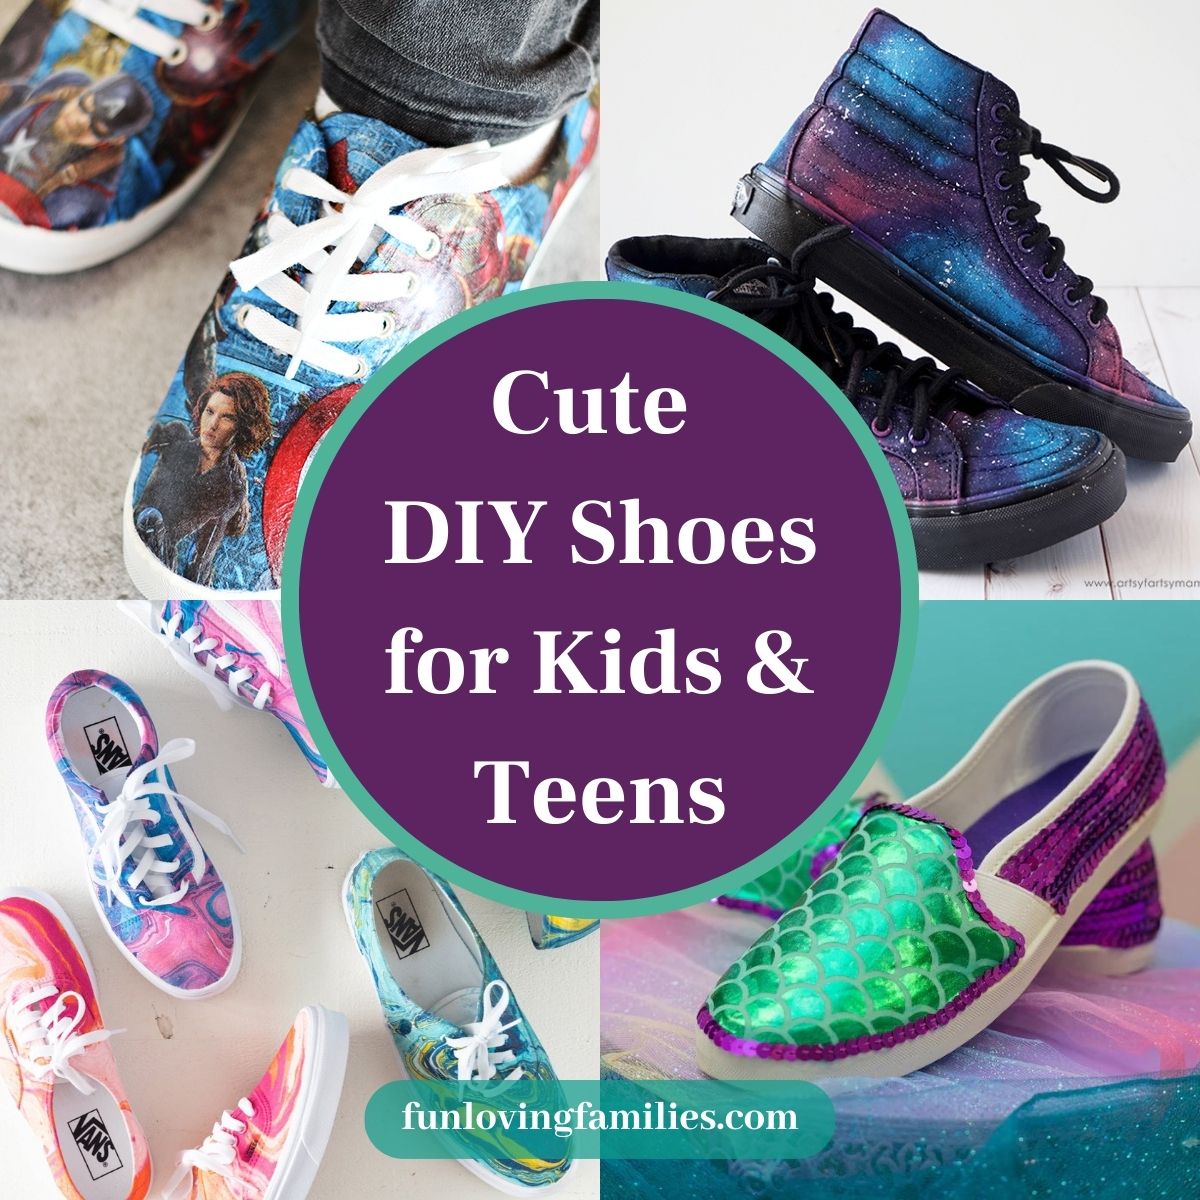 DIY Shoes: 25 Ways to Decorate, Embellish, and Spice Up Your Kicks